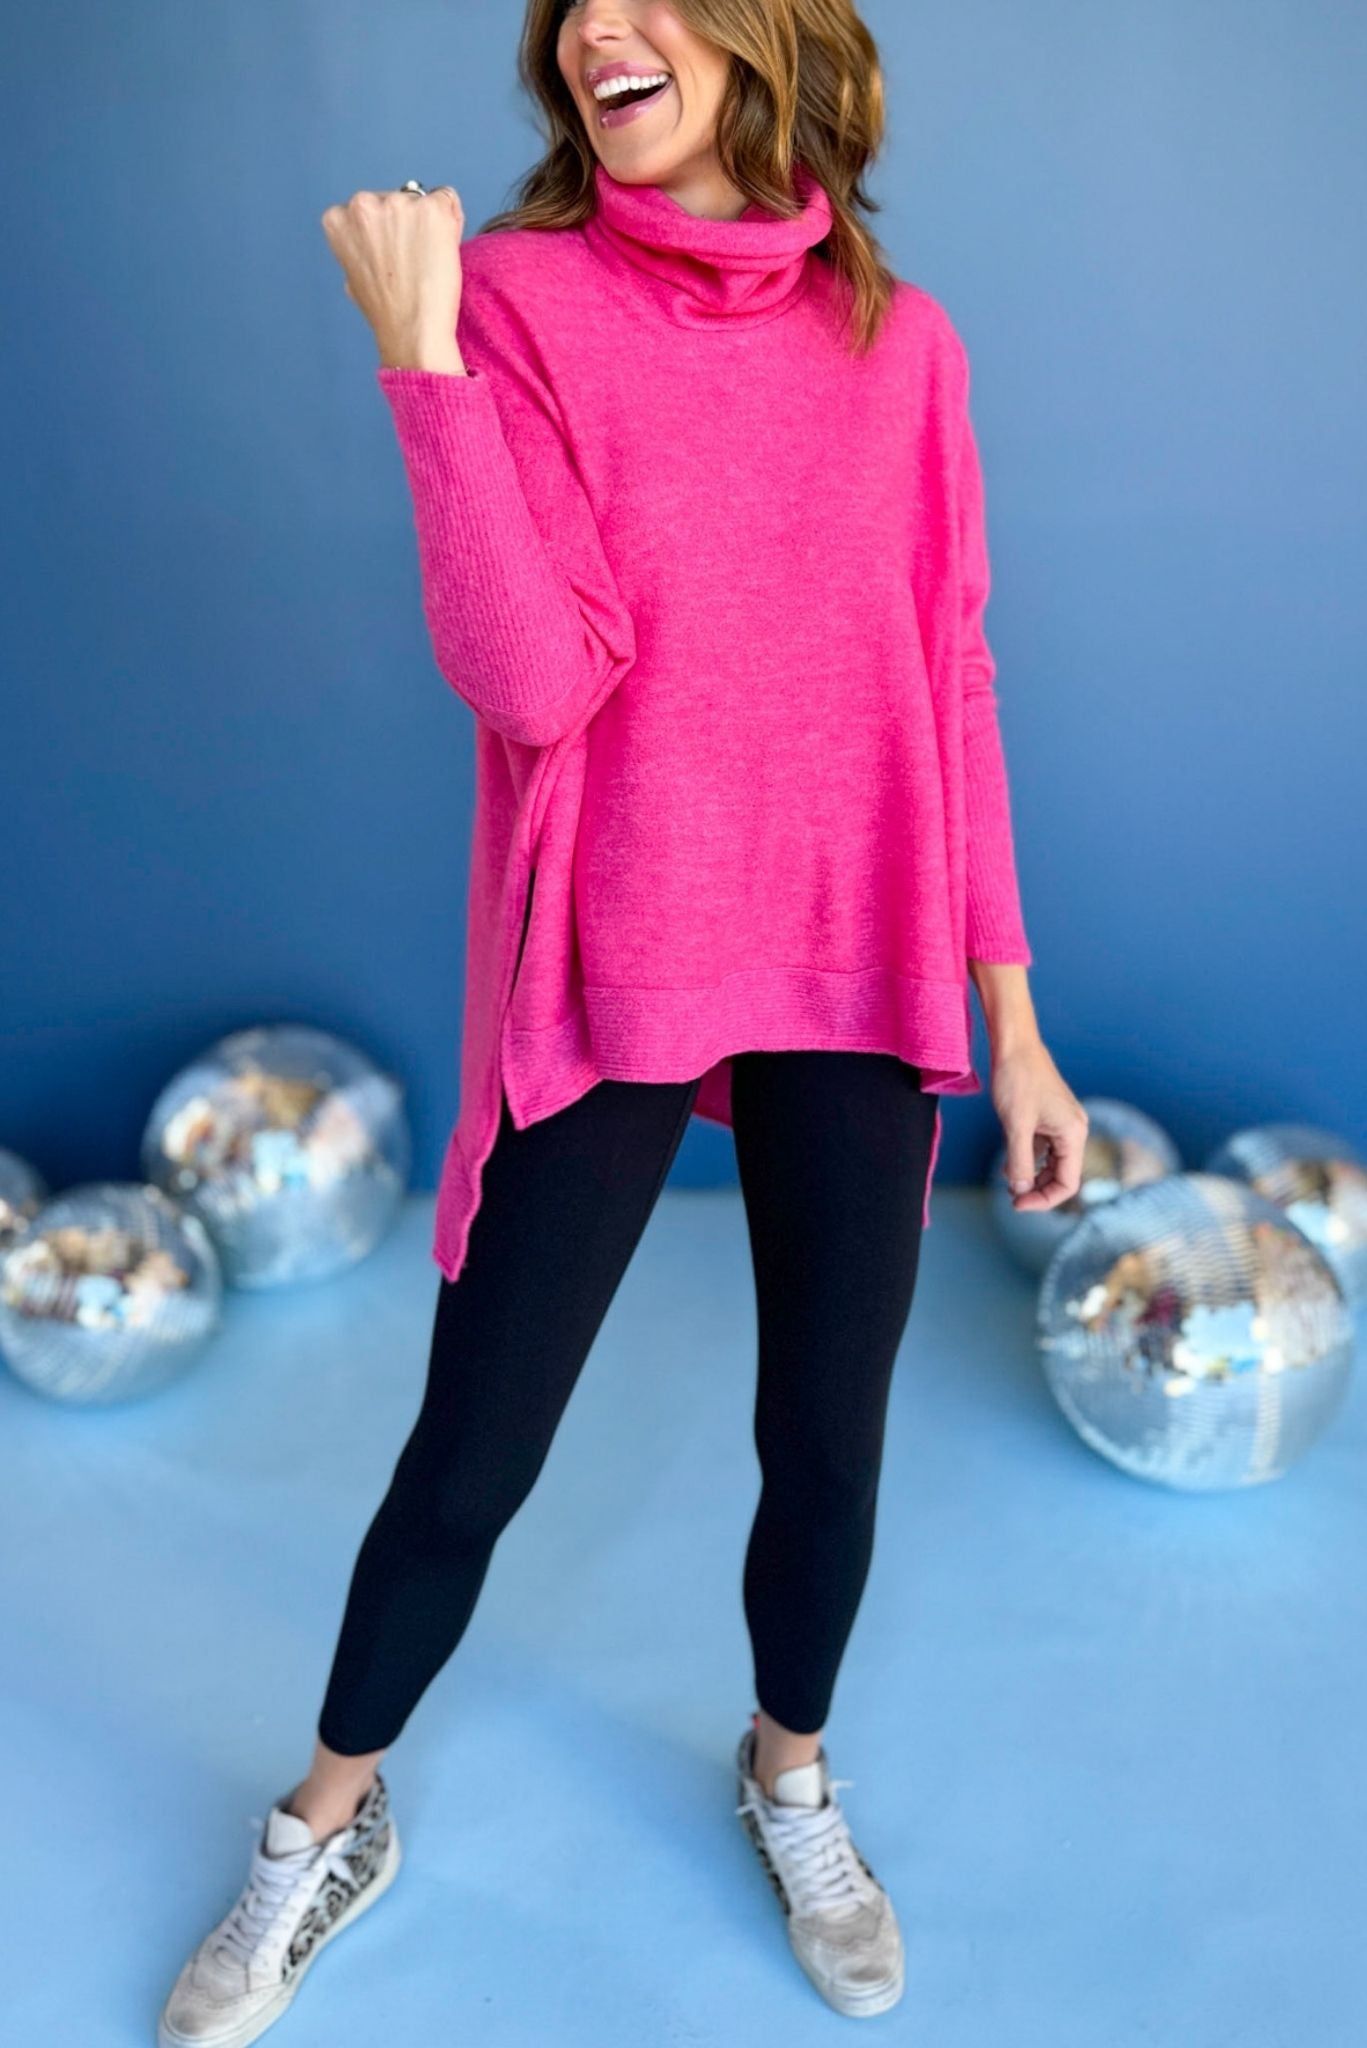 Hot Pink Cowl Neck Top, cozy style, cozy top, must have cozy, must have top, must have style, winter style, winter fashion, elevated style, elevated top, mom style, winter top, shop style your senses by mallory fitzsimmons